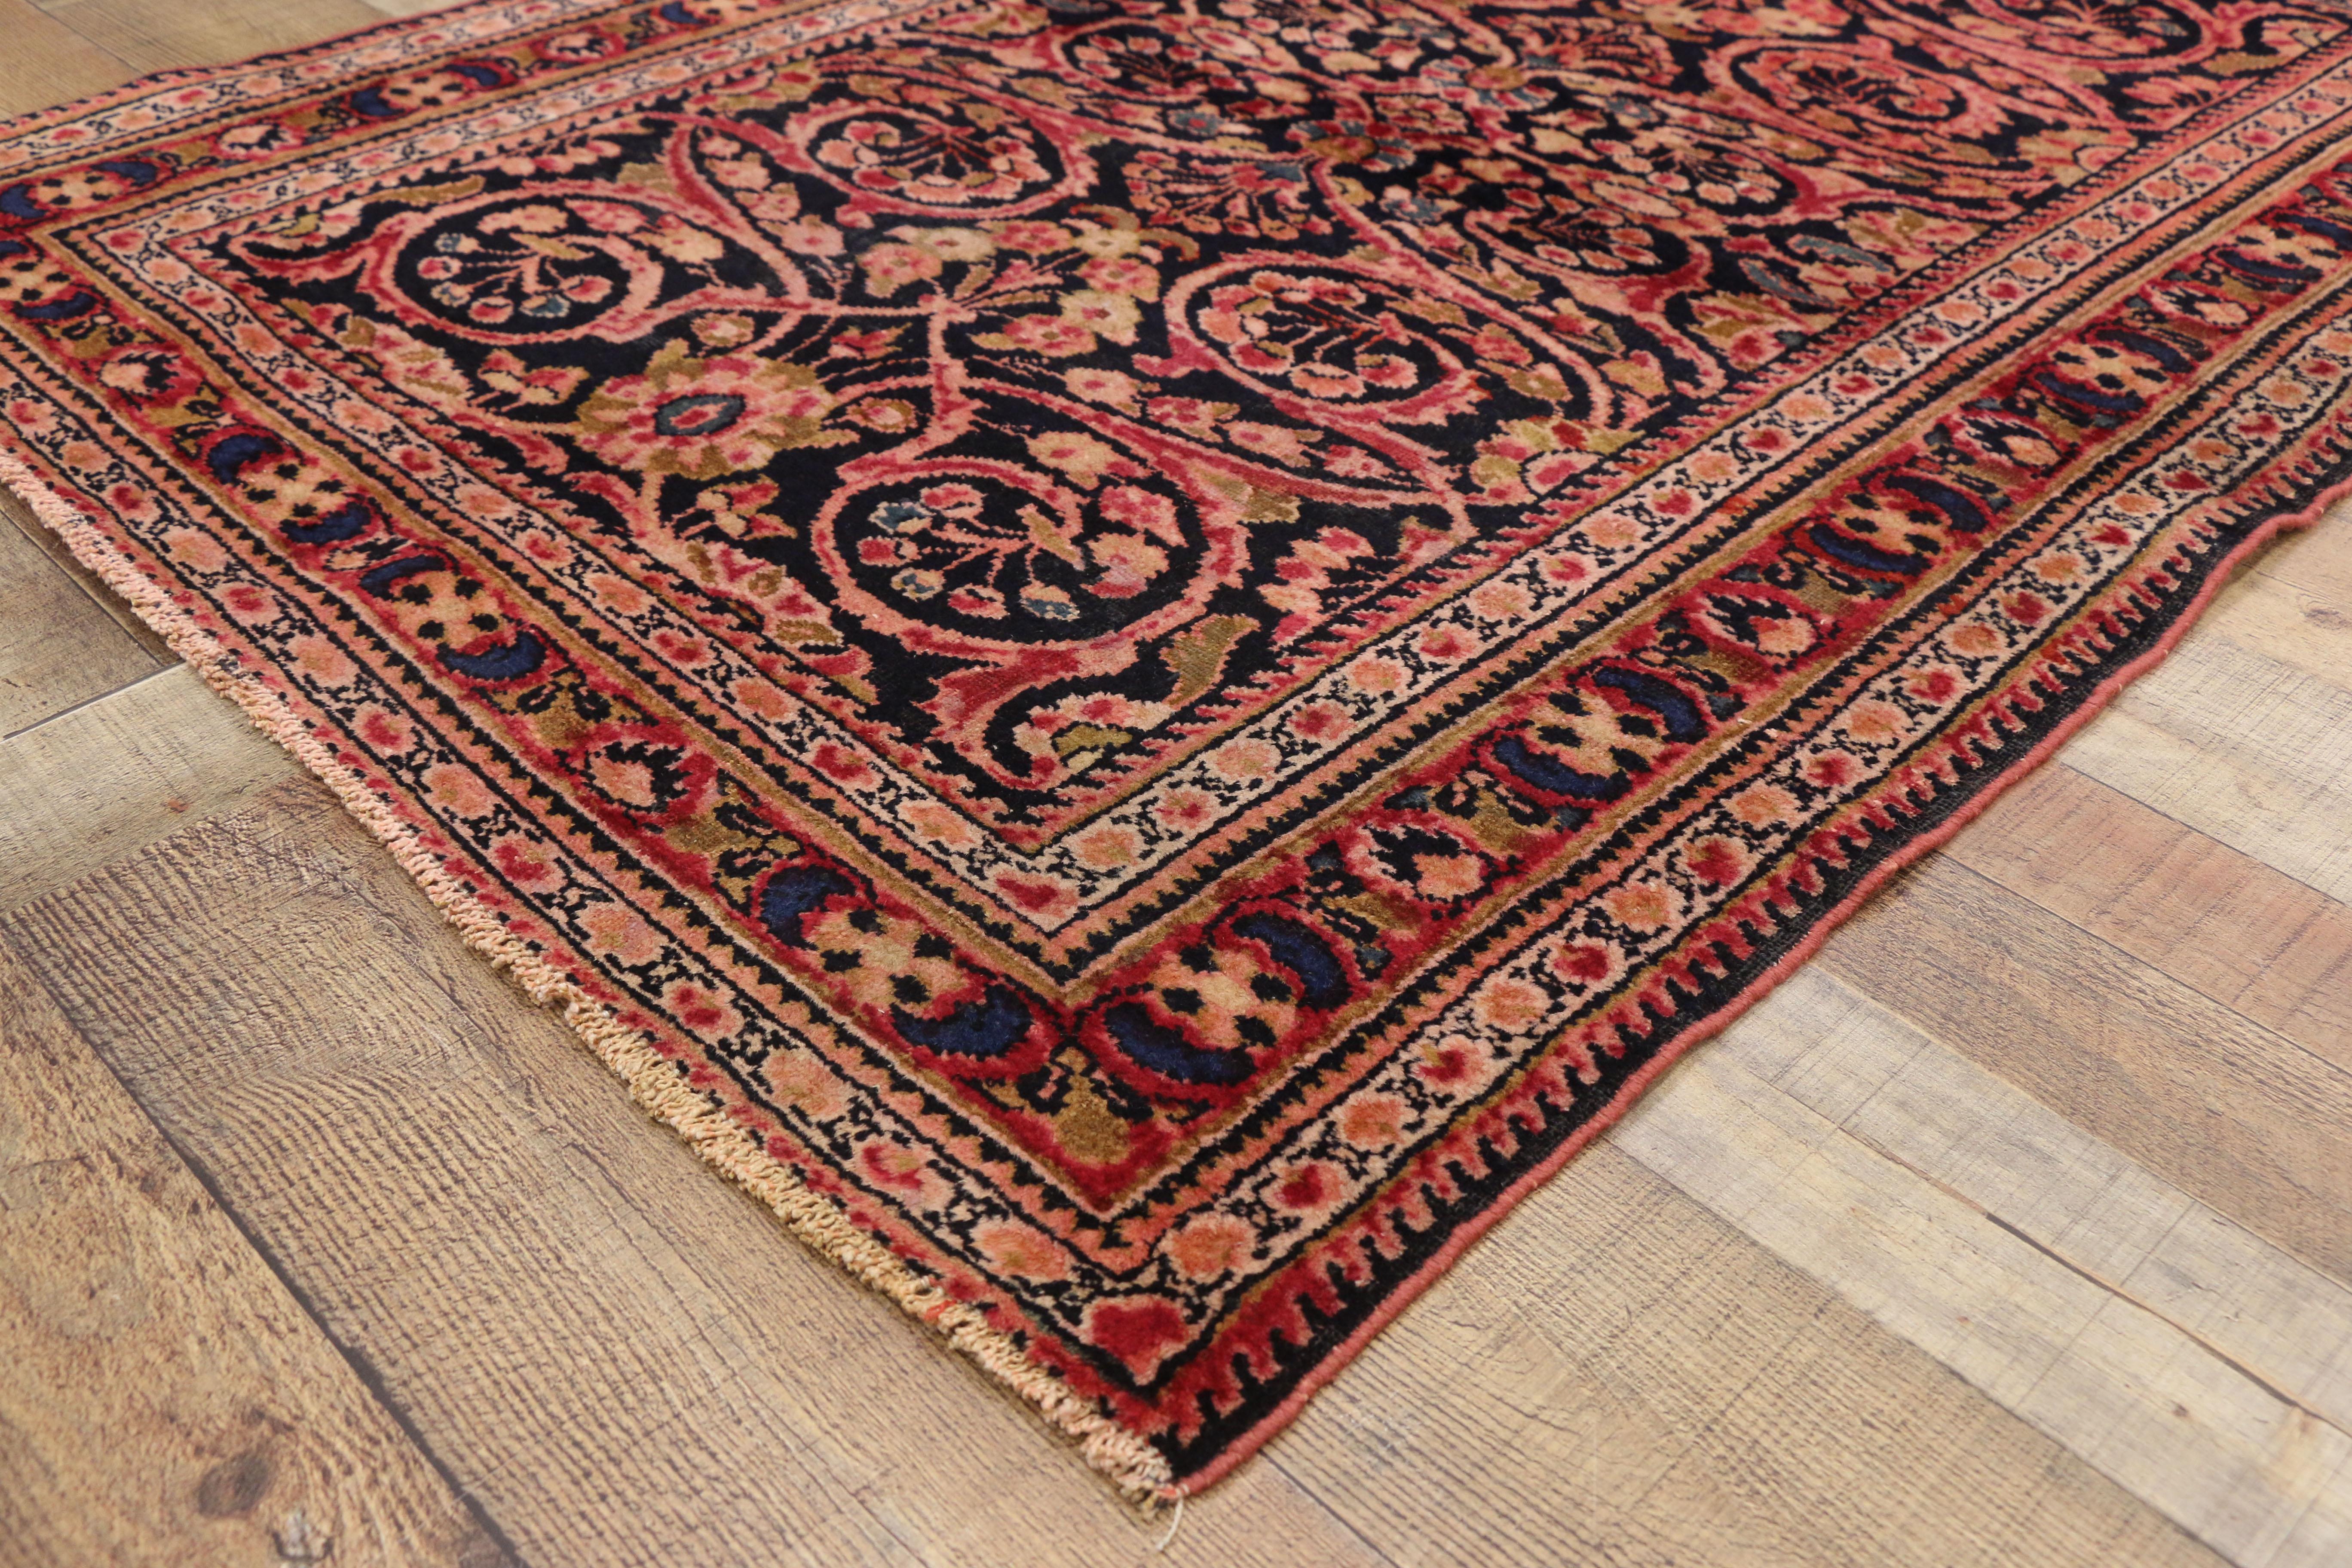 20th Century Antique Persian Lilihan Rug with Baroque Renaissance Style, Pink Persian Rug